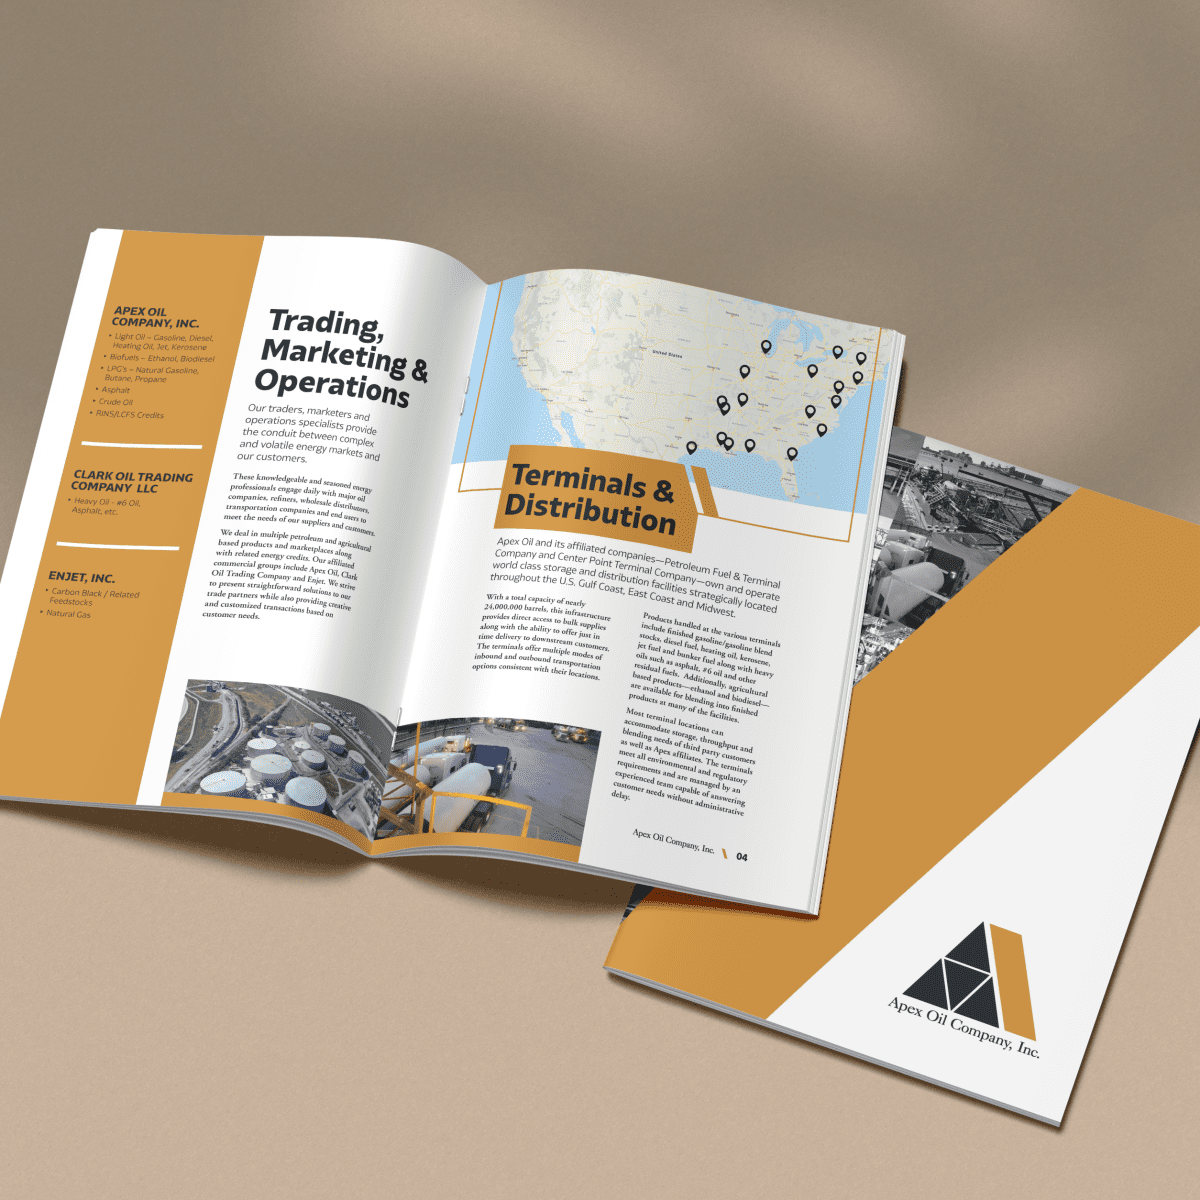 Mockup showing the marketing booklet for Apex Oil company